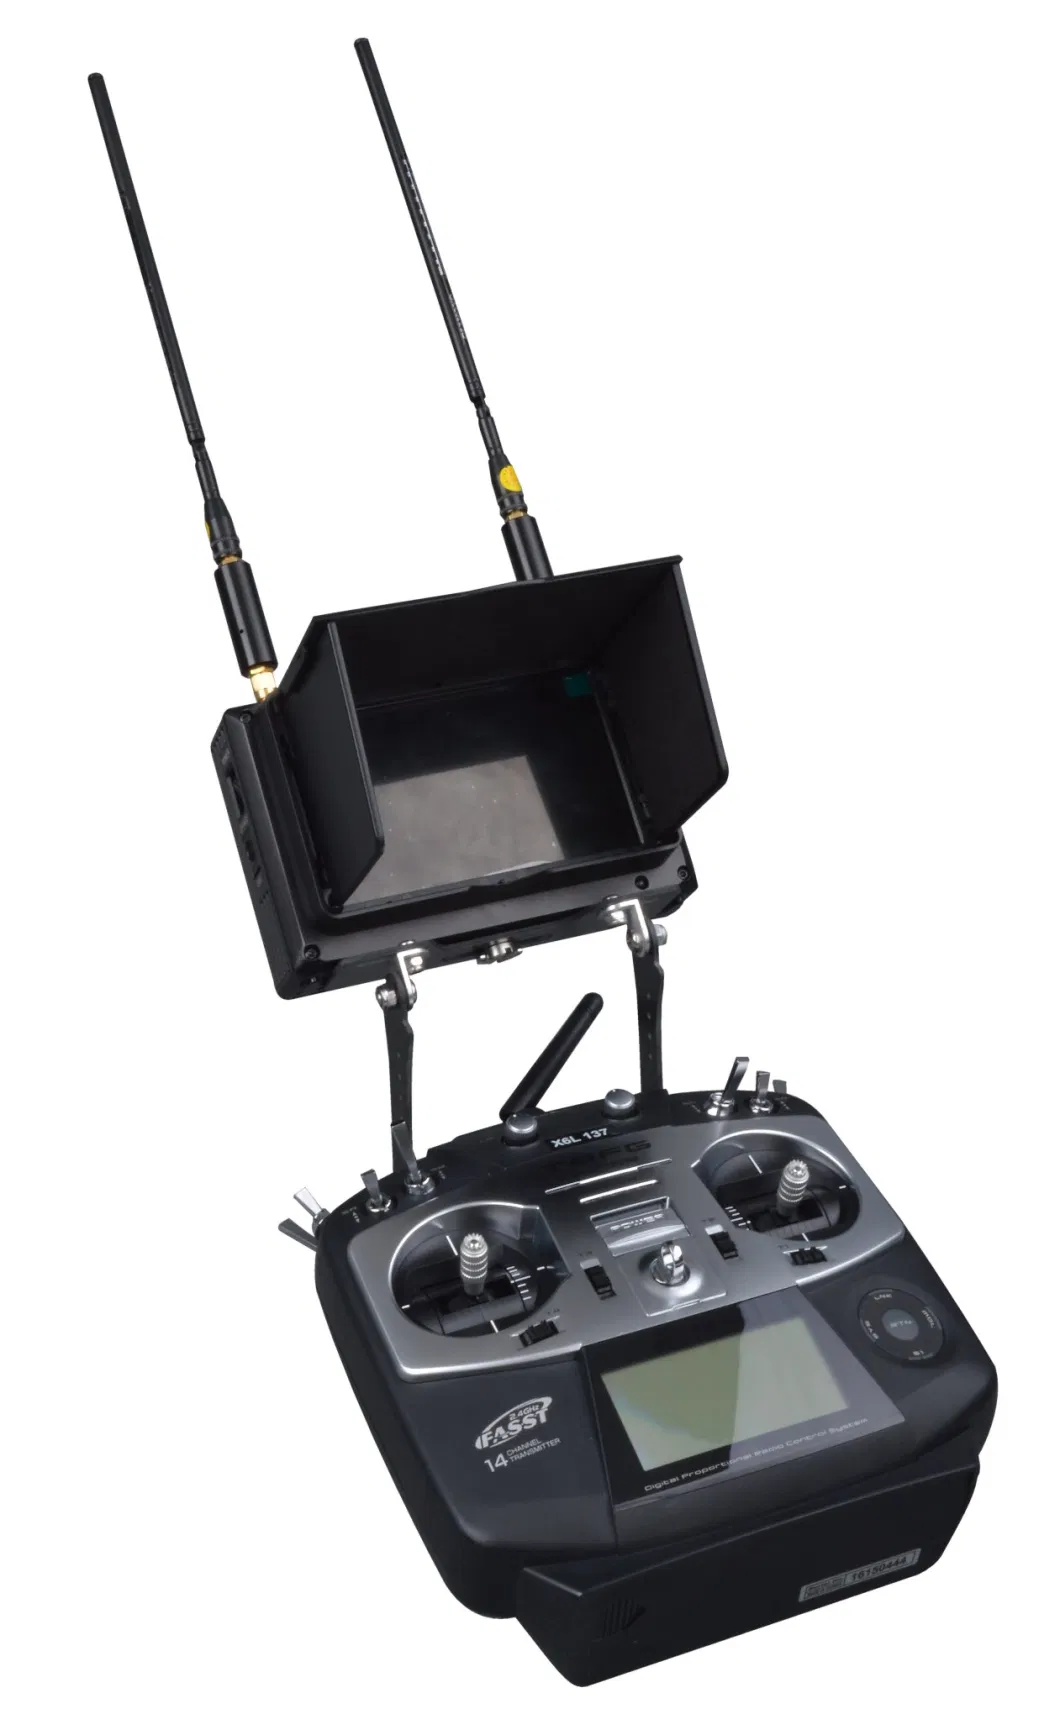 Super Low Latency HD Camera Mounted on Uav for Real Time Wireless Mobile Video Transmission